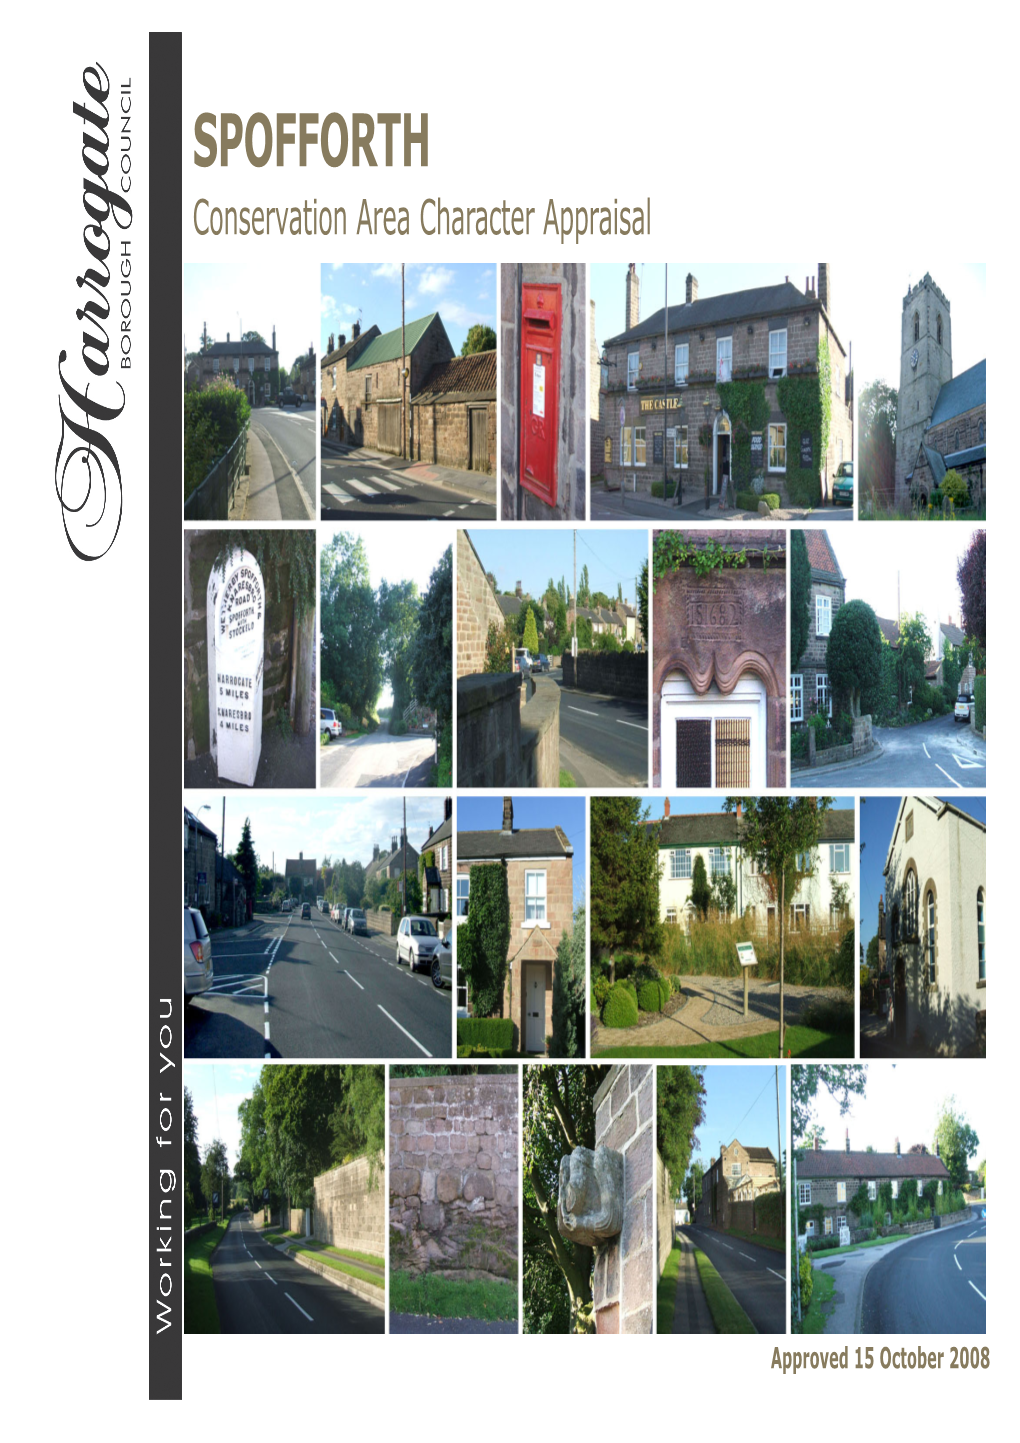 SPOFFORTH Conservation Area Character Appraisal